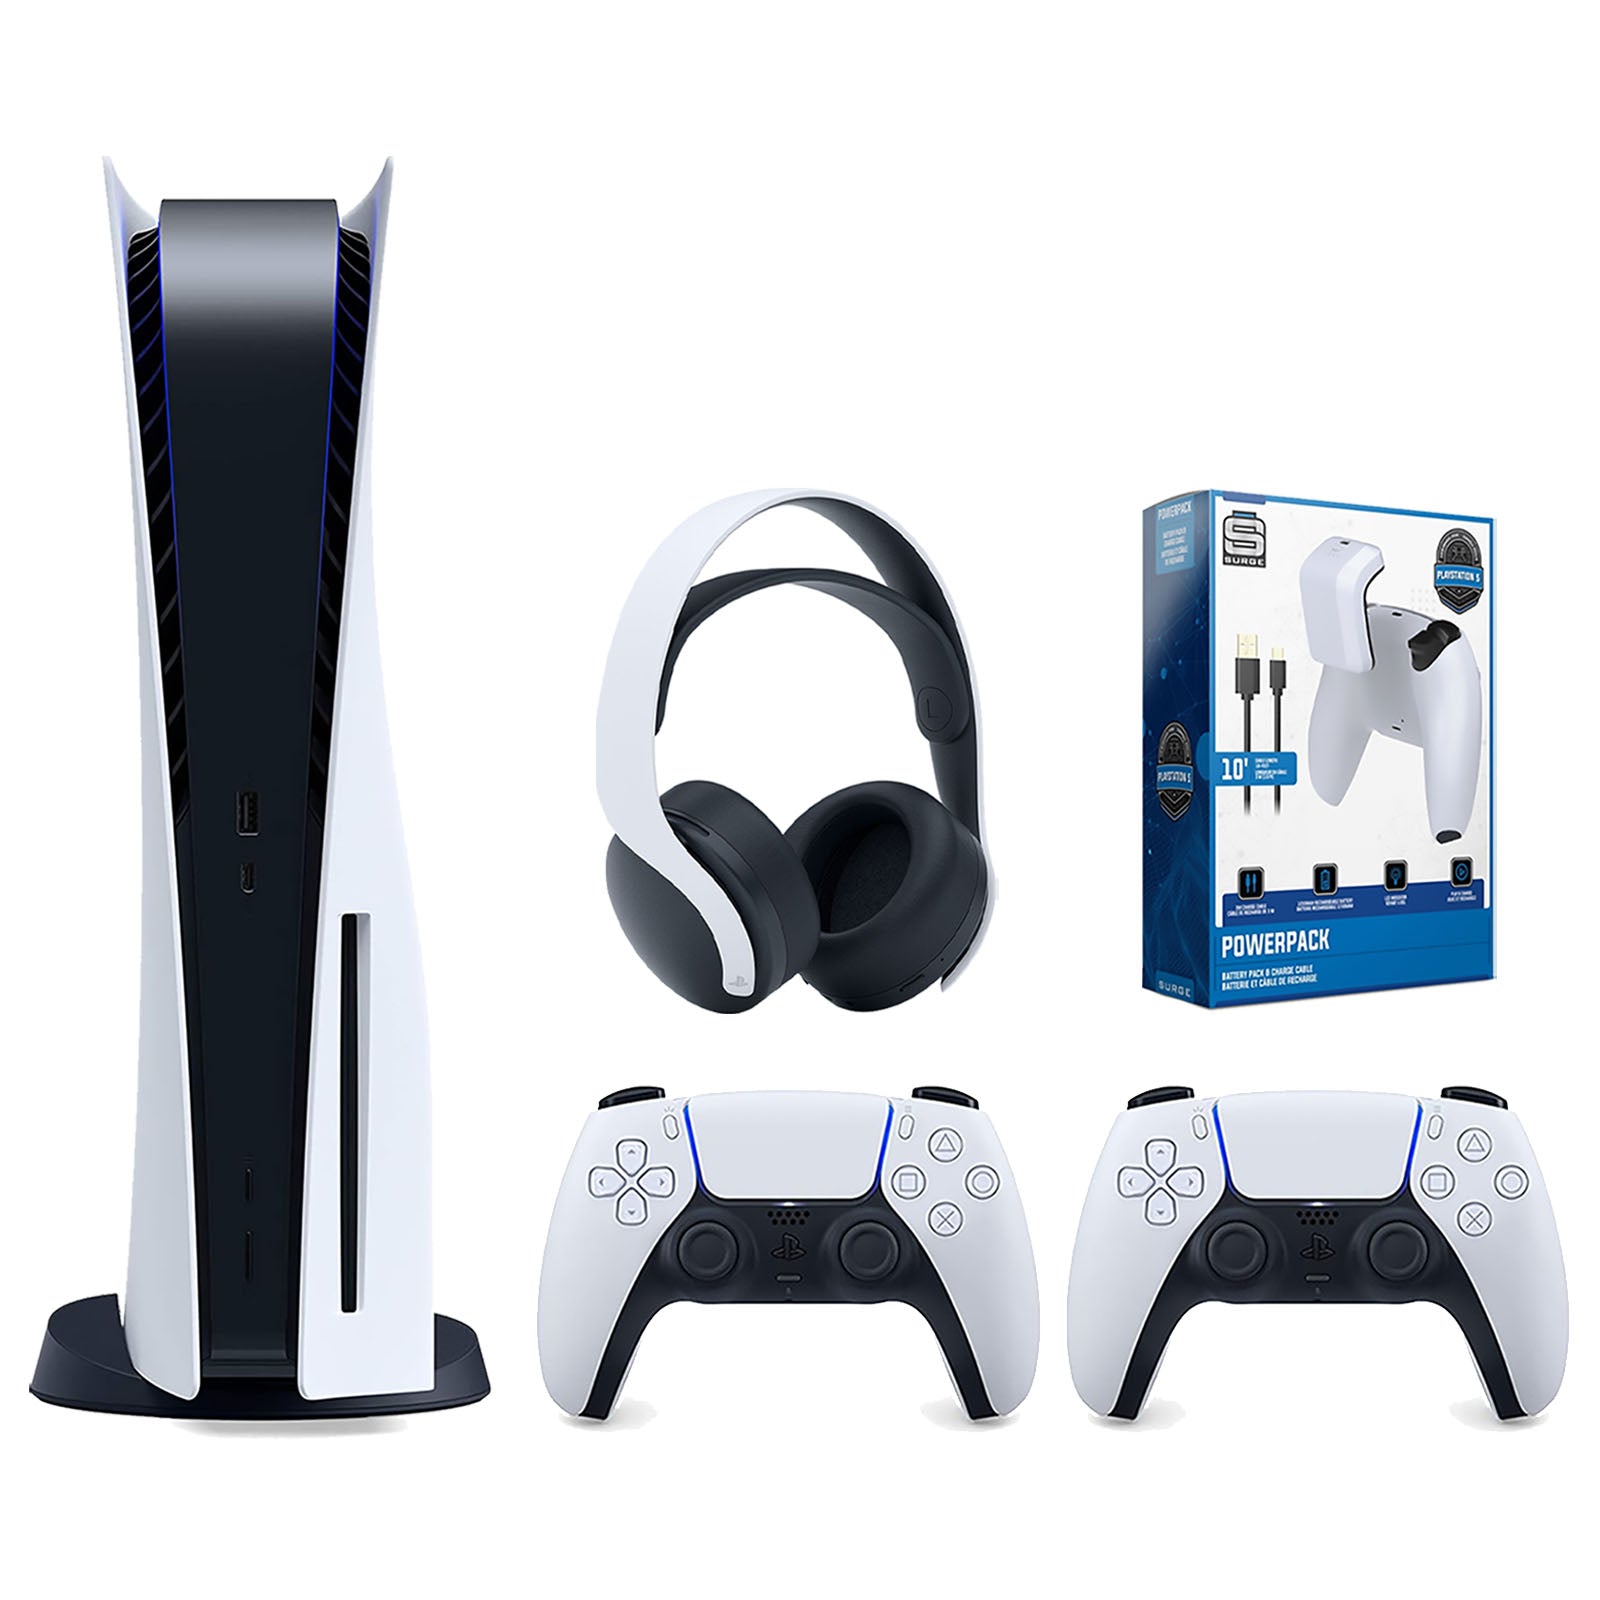 Sony Playstation 5 Disc Version Console with Extra White Controller, White PULSE 3D Headset and Surge PowerPack Battery Pack & Charge Cable Bundle - Pro-Distributing